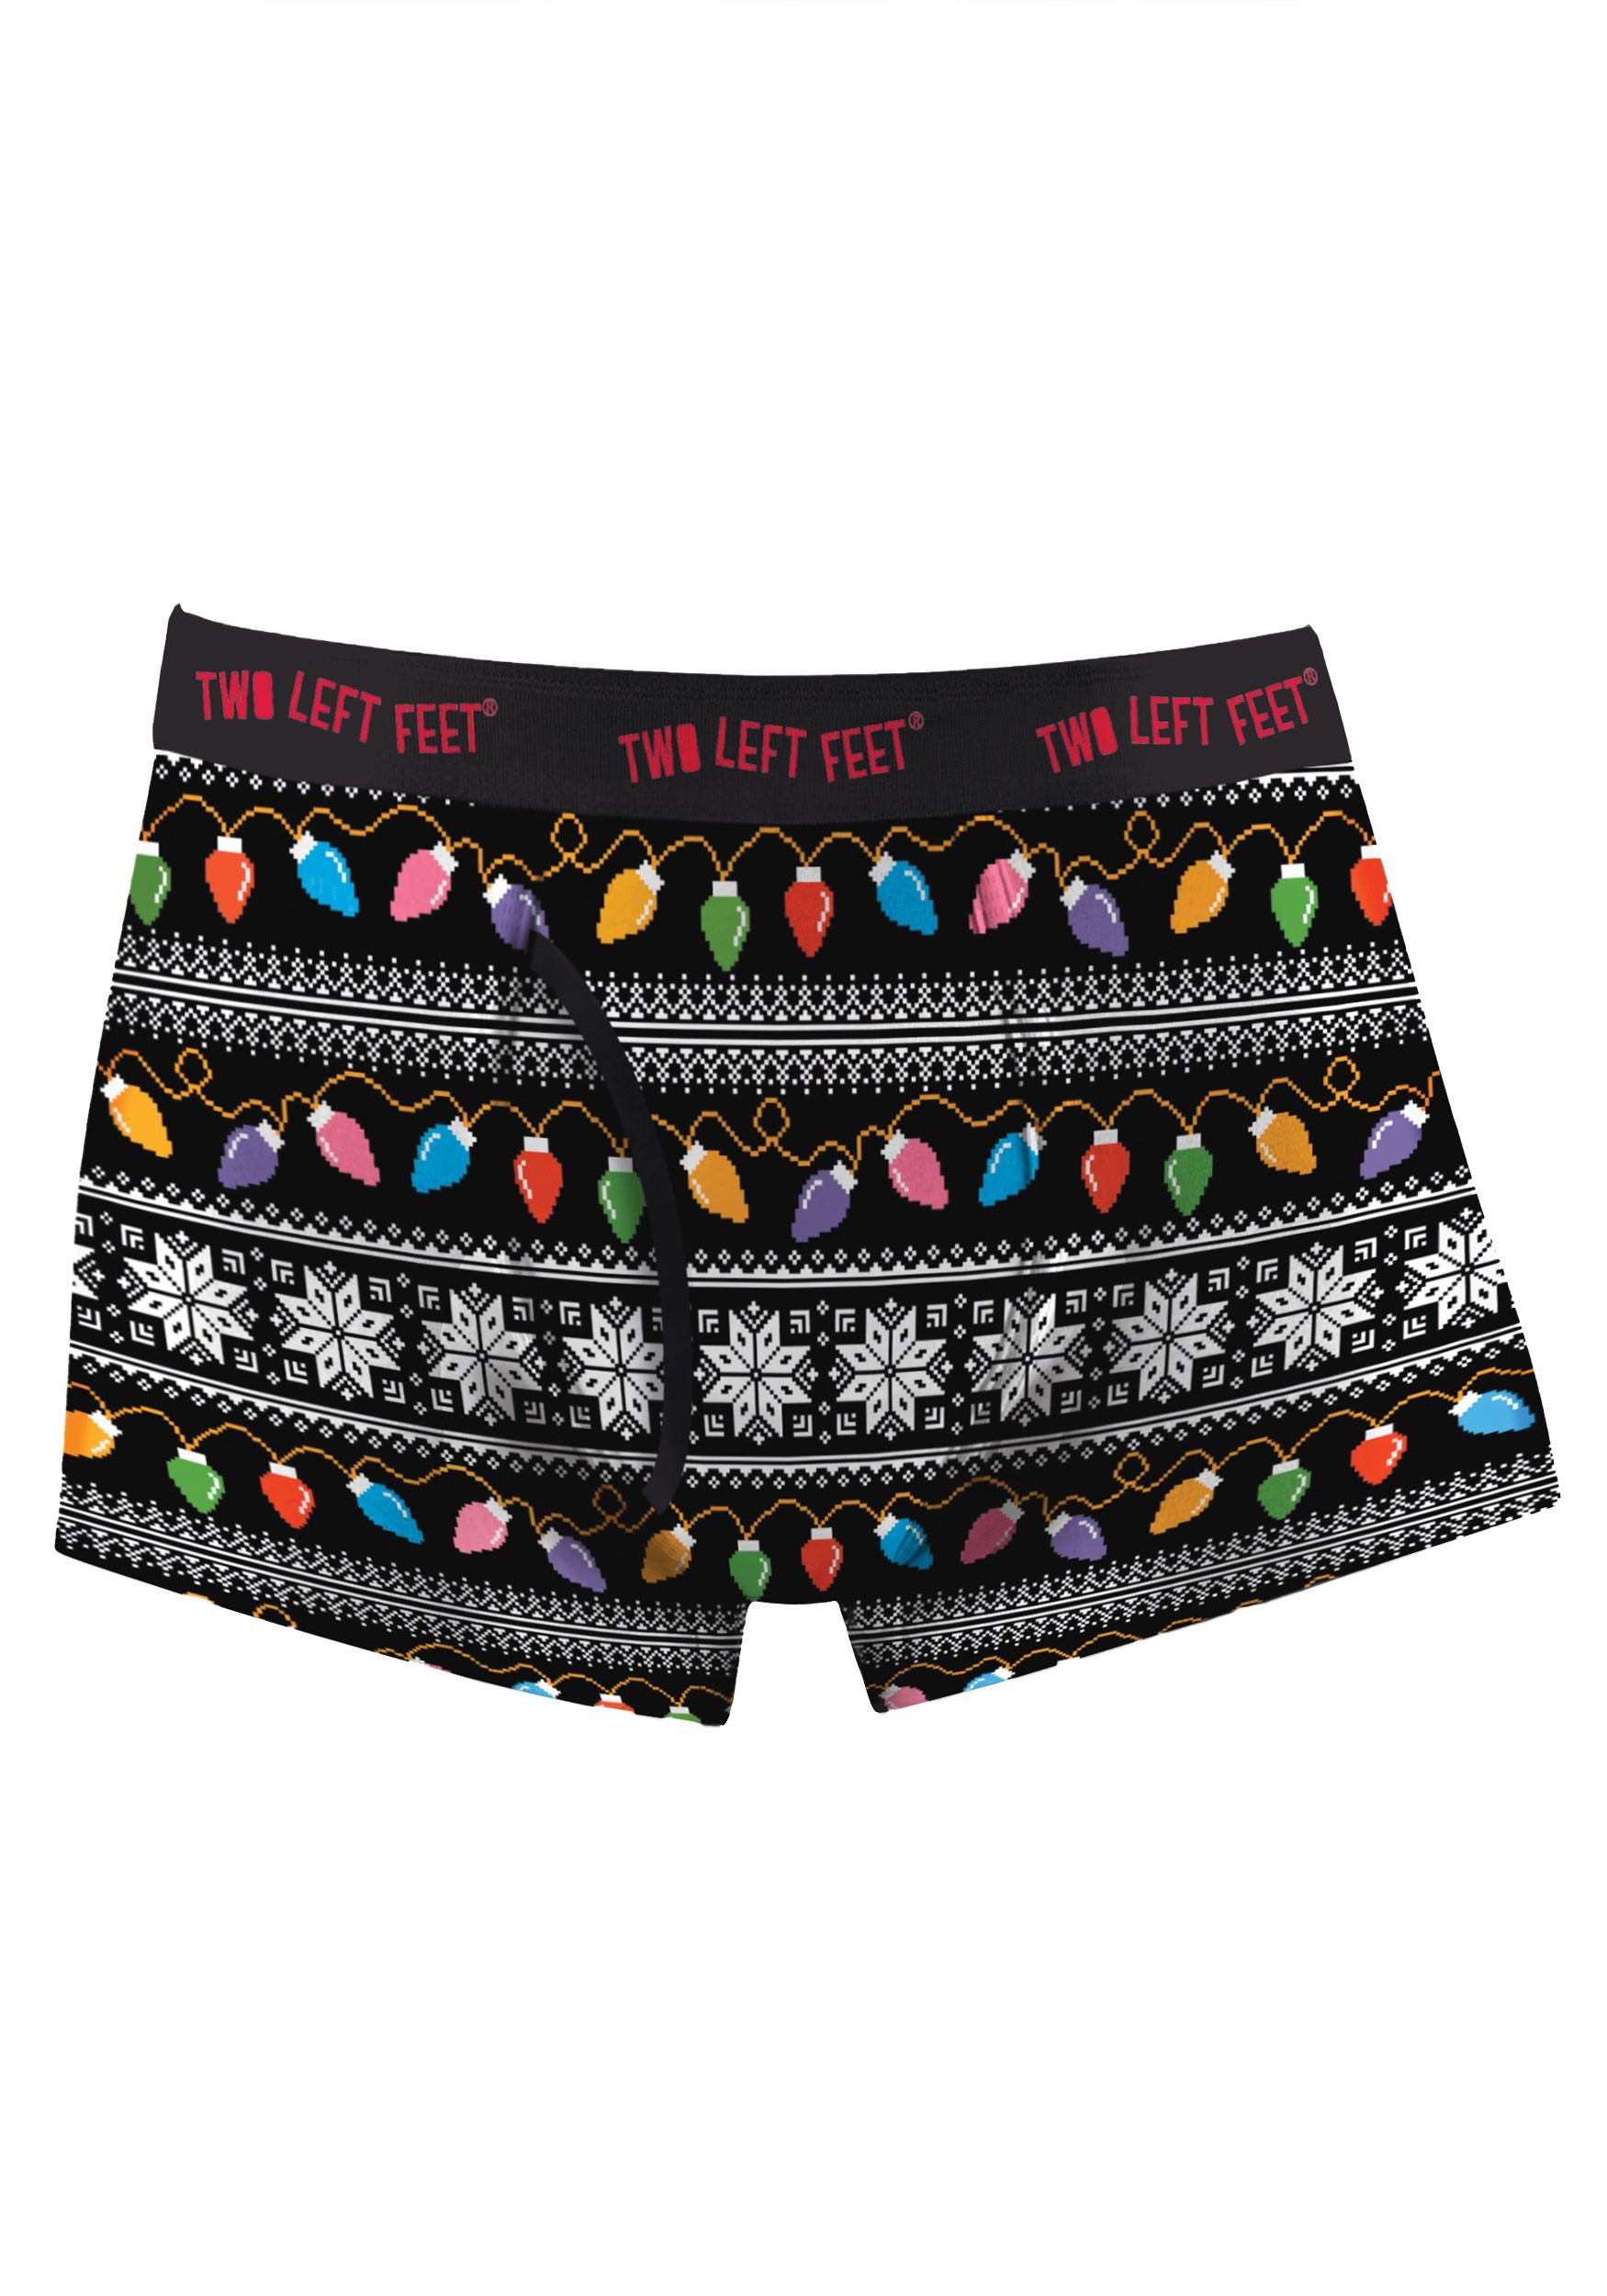 Christmas Lights Men's Trunk Boxer Brief Underwear Two Left Feet 'All Lit Up'